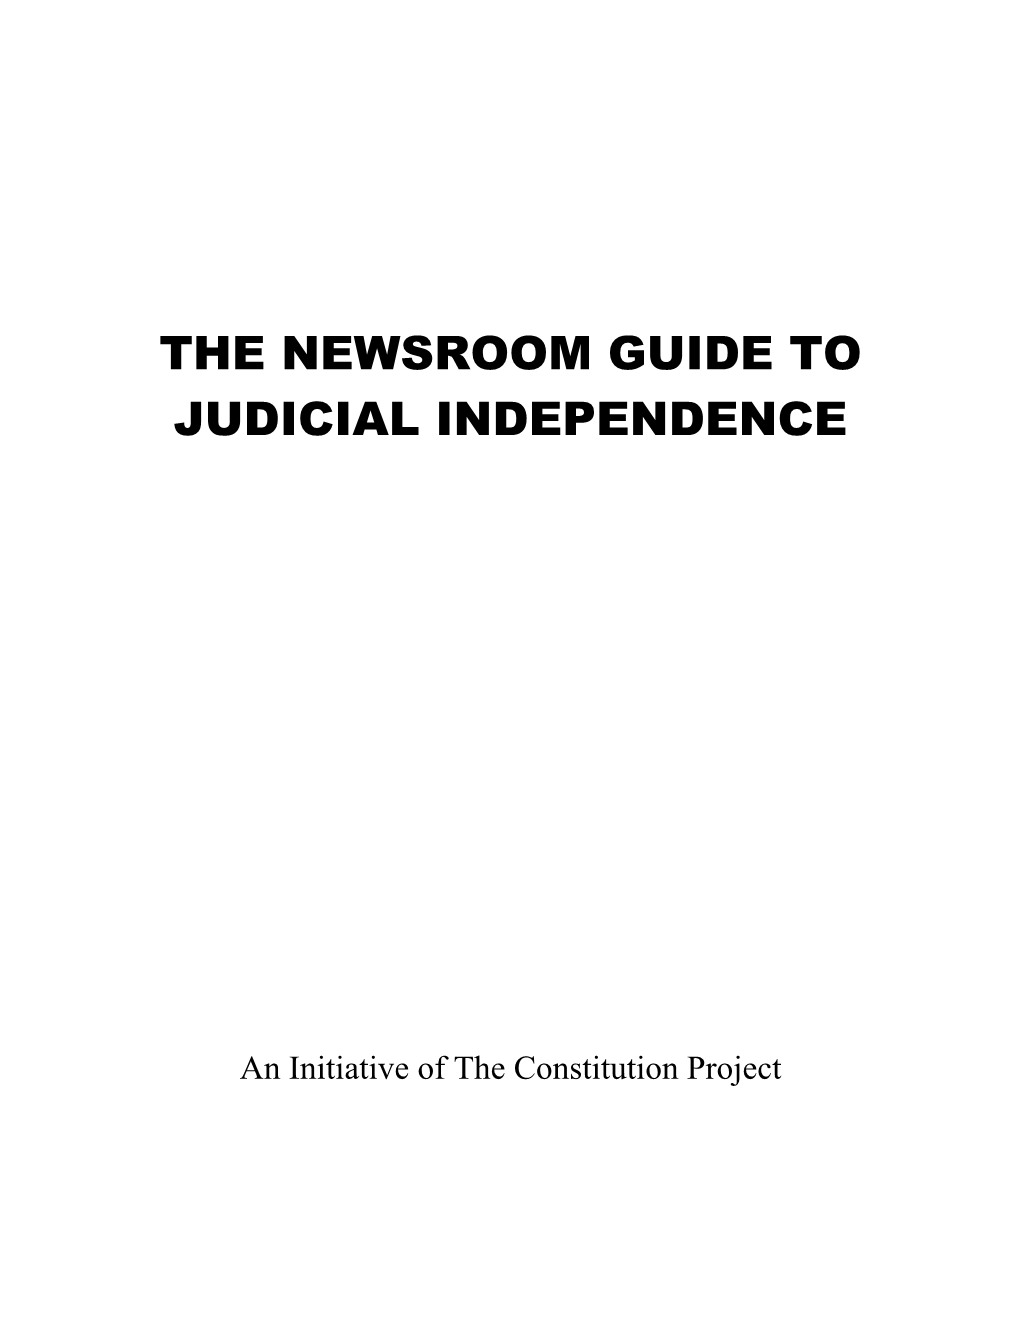 The Newsroom Guide to Judicial Independence